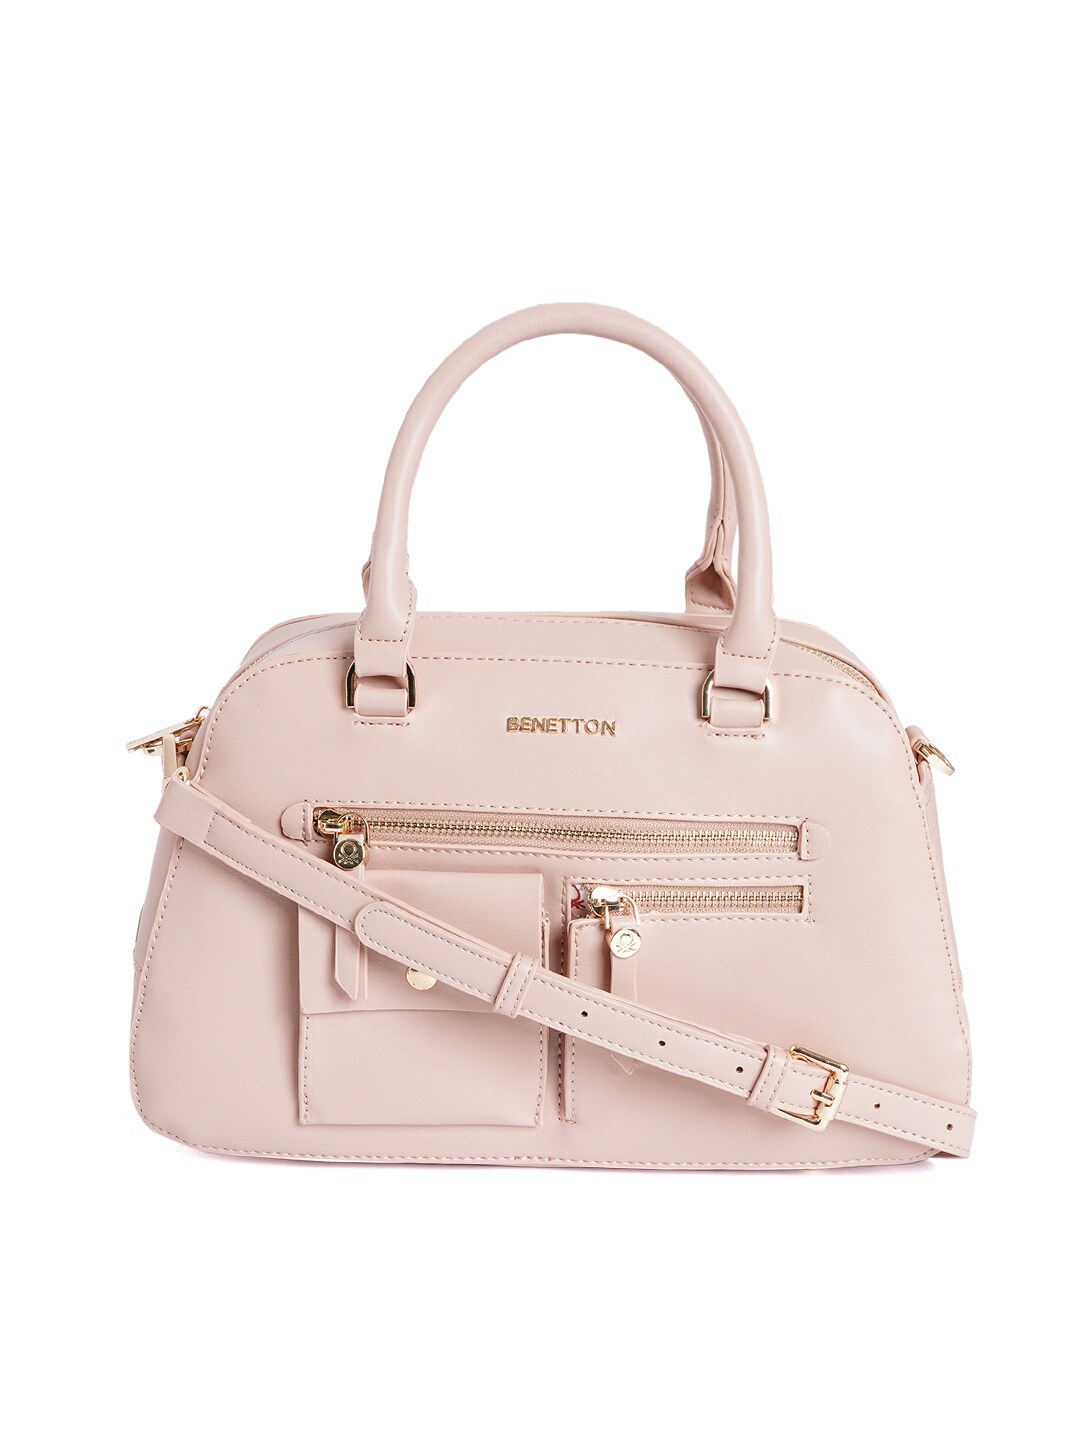 United Colors of Benetton Beige Solid Shoulder Bag Price in India